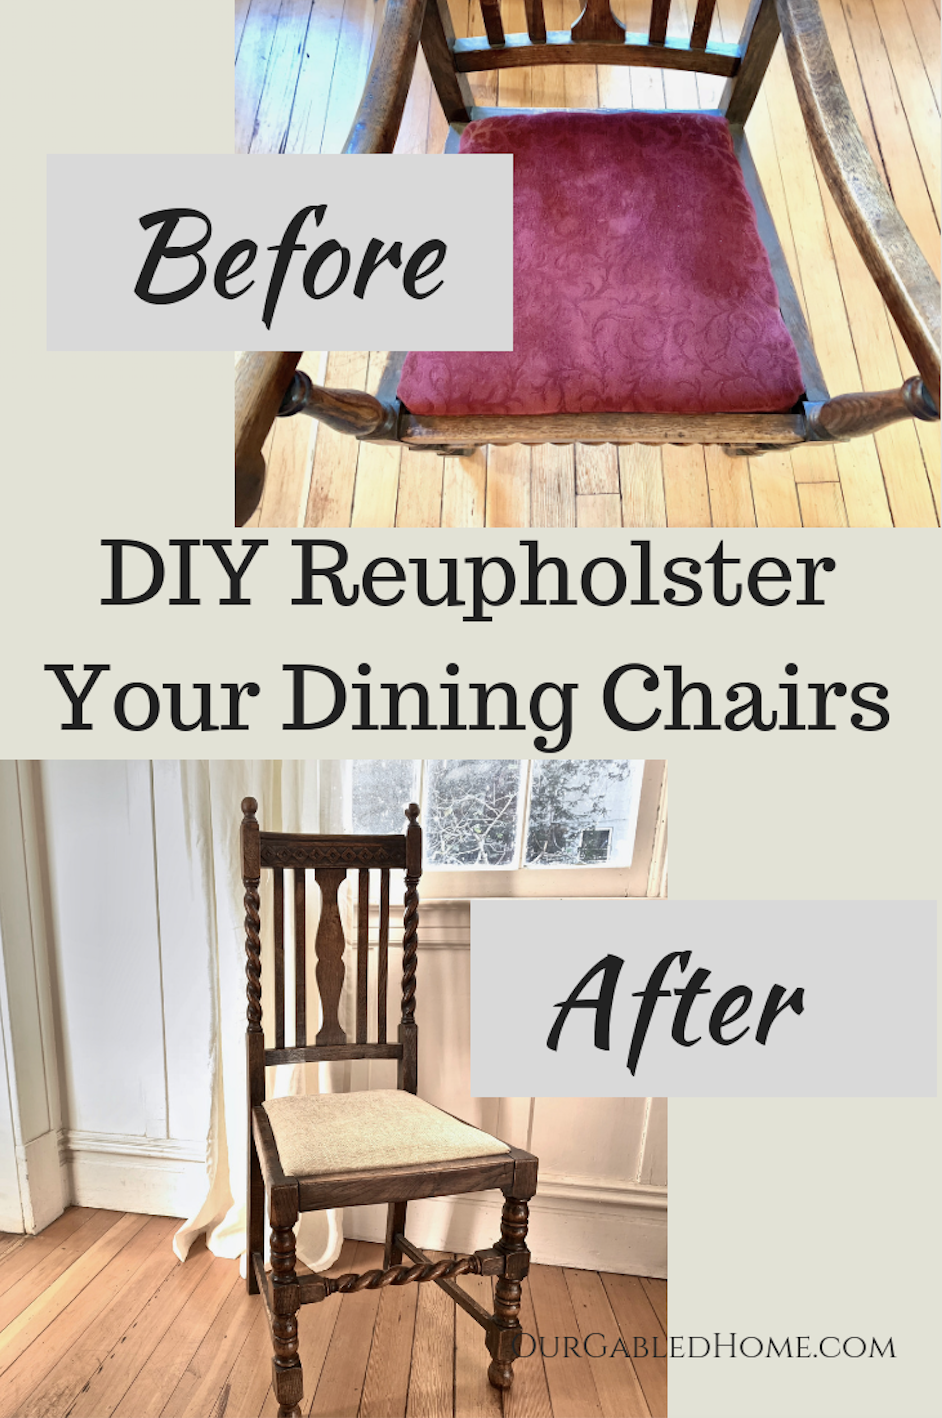 DIY Reupholstering Dining Chairs